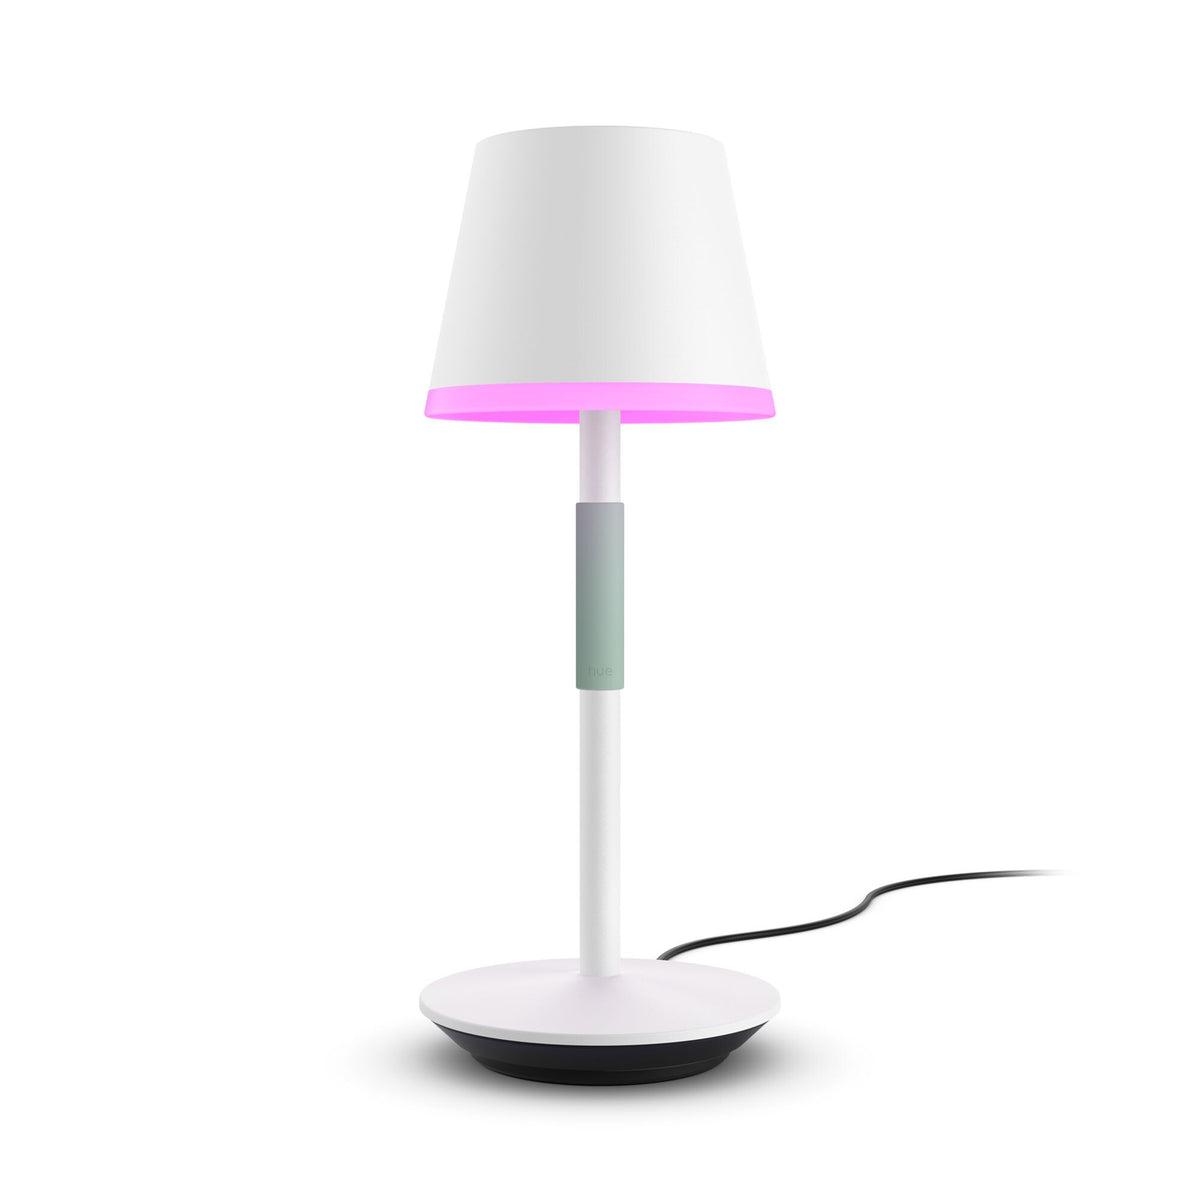 Philips Go portable table lamp in White - White and colour ambience